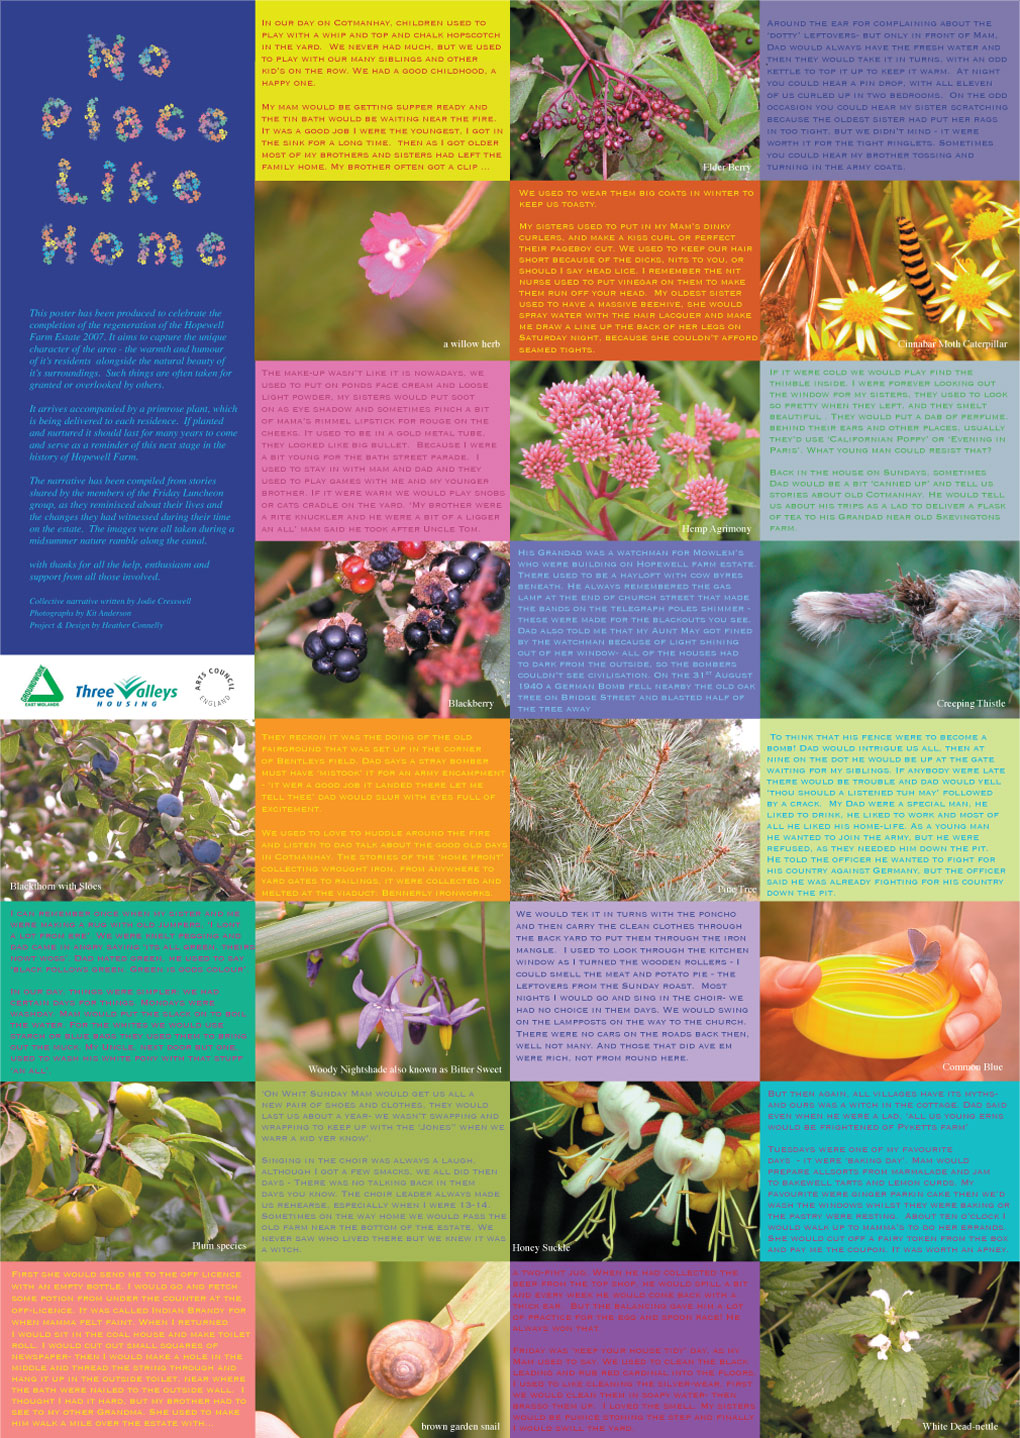 no place like home poster featuring nature photos and collaborative narrative